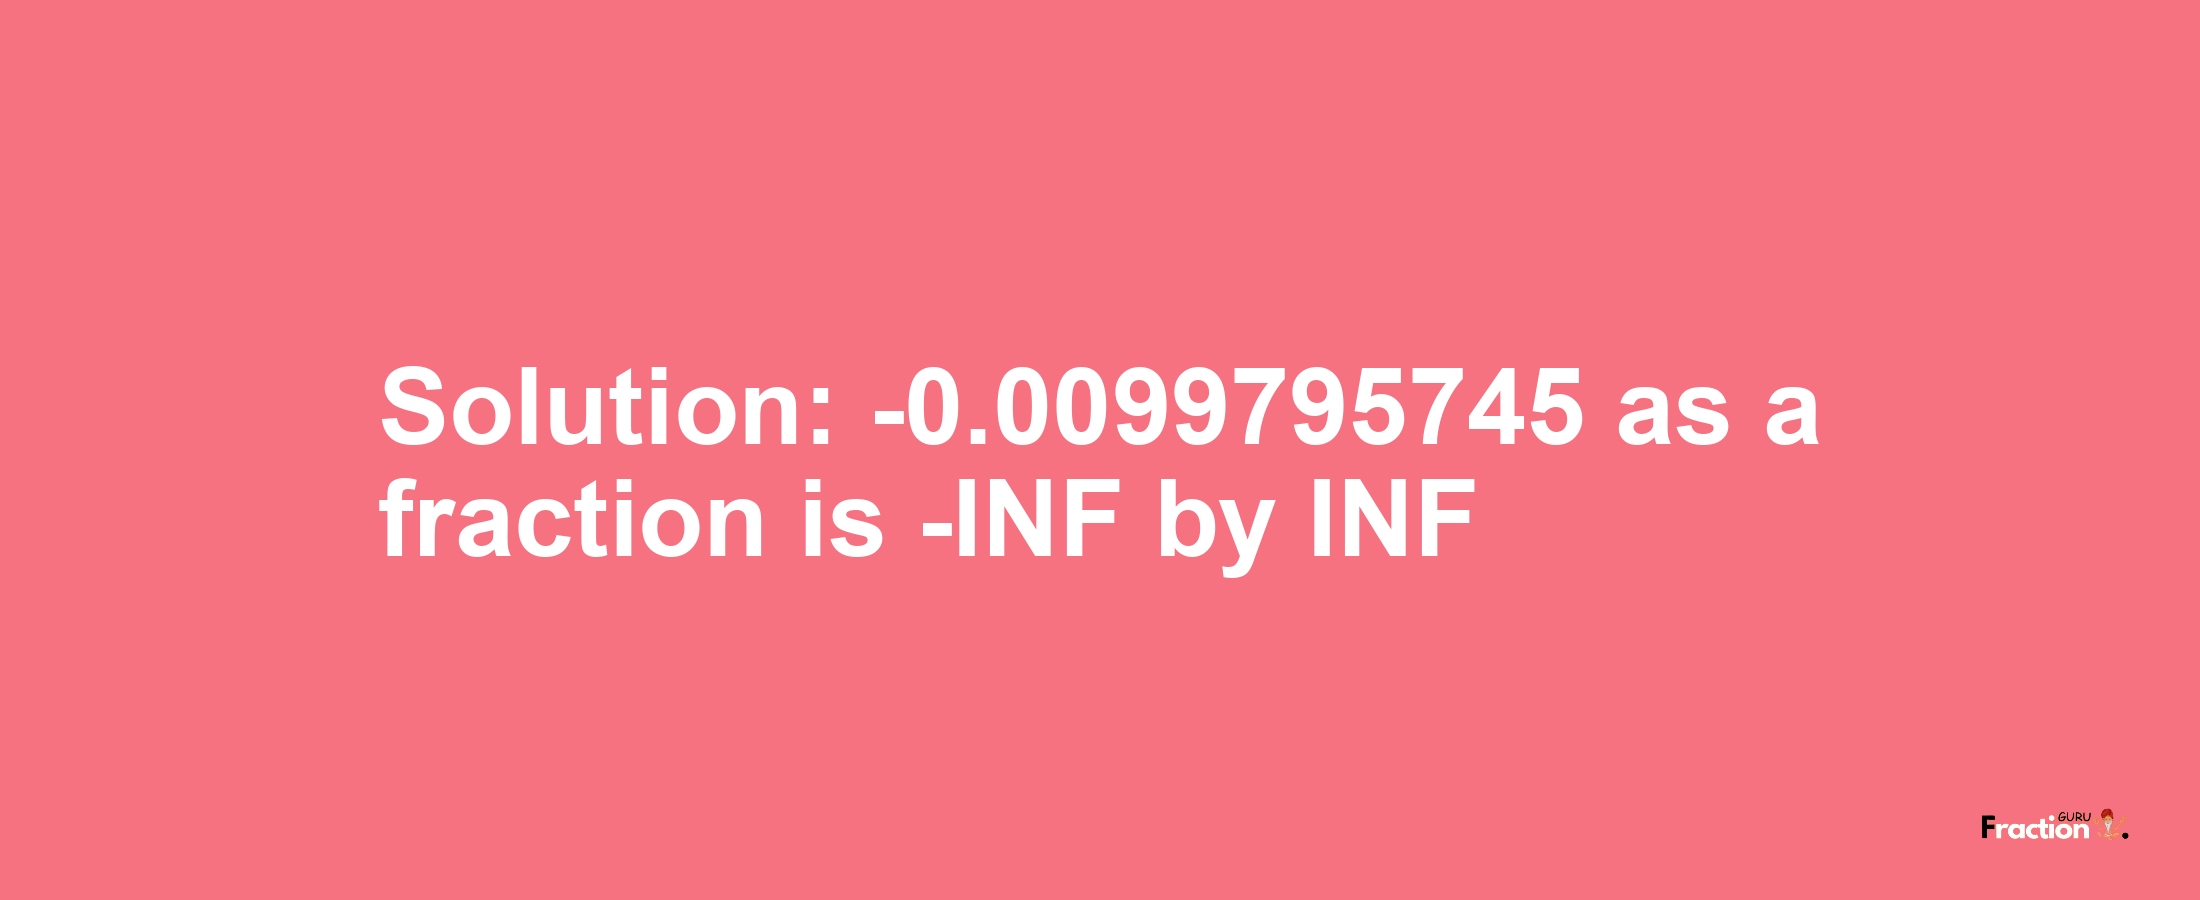 Solution:-0.0099795745 as a fraction is -INF/INF